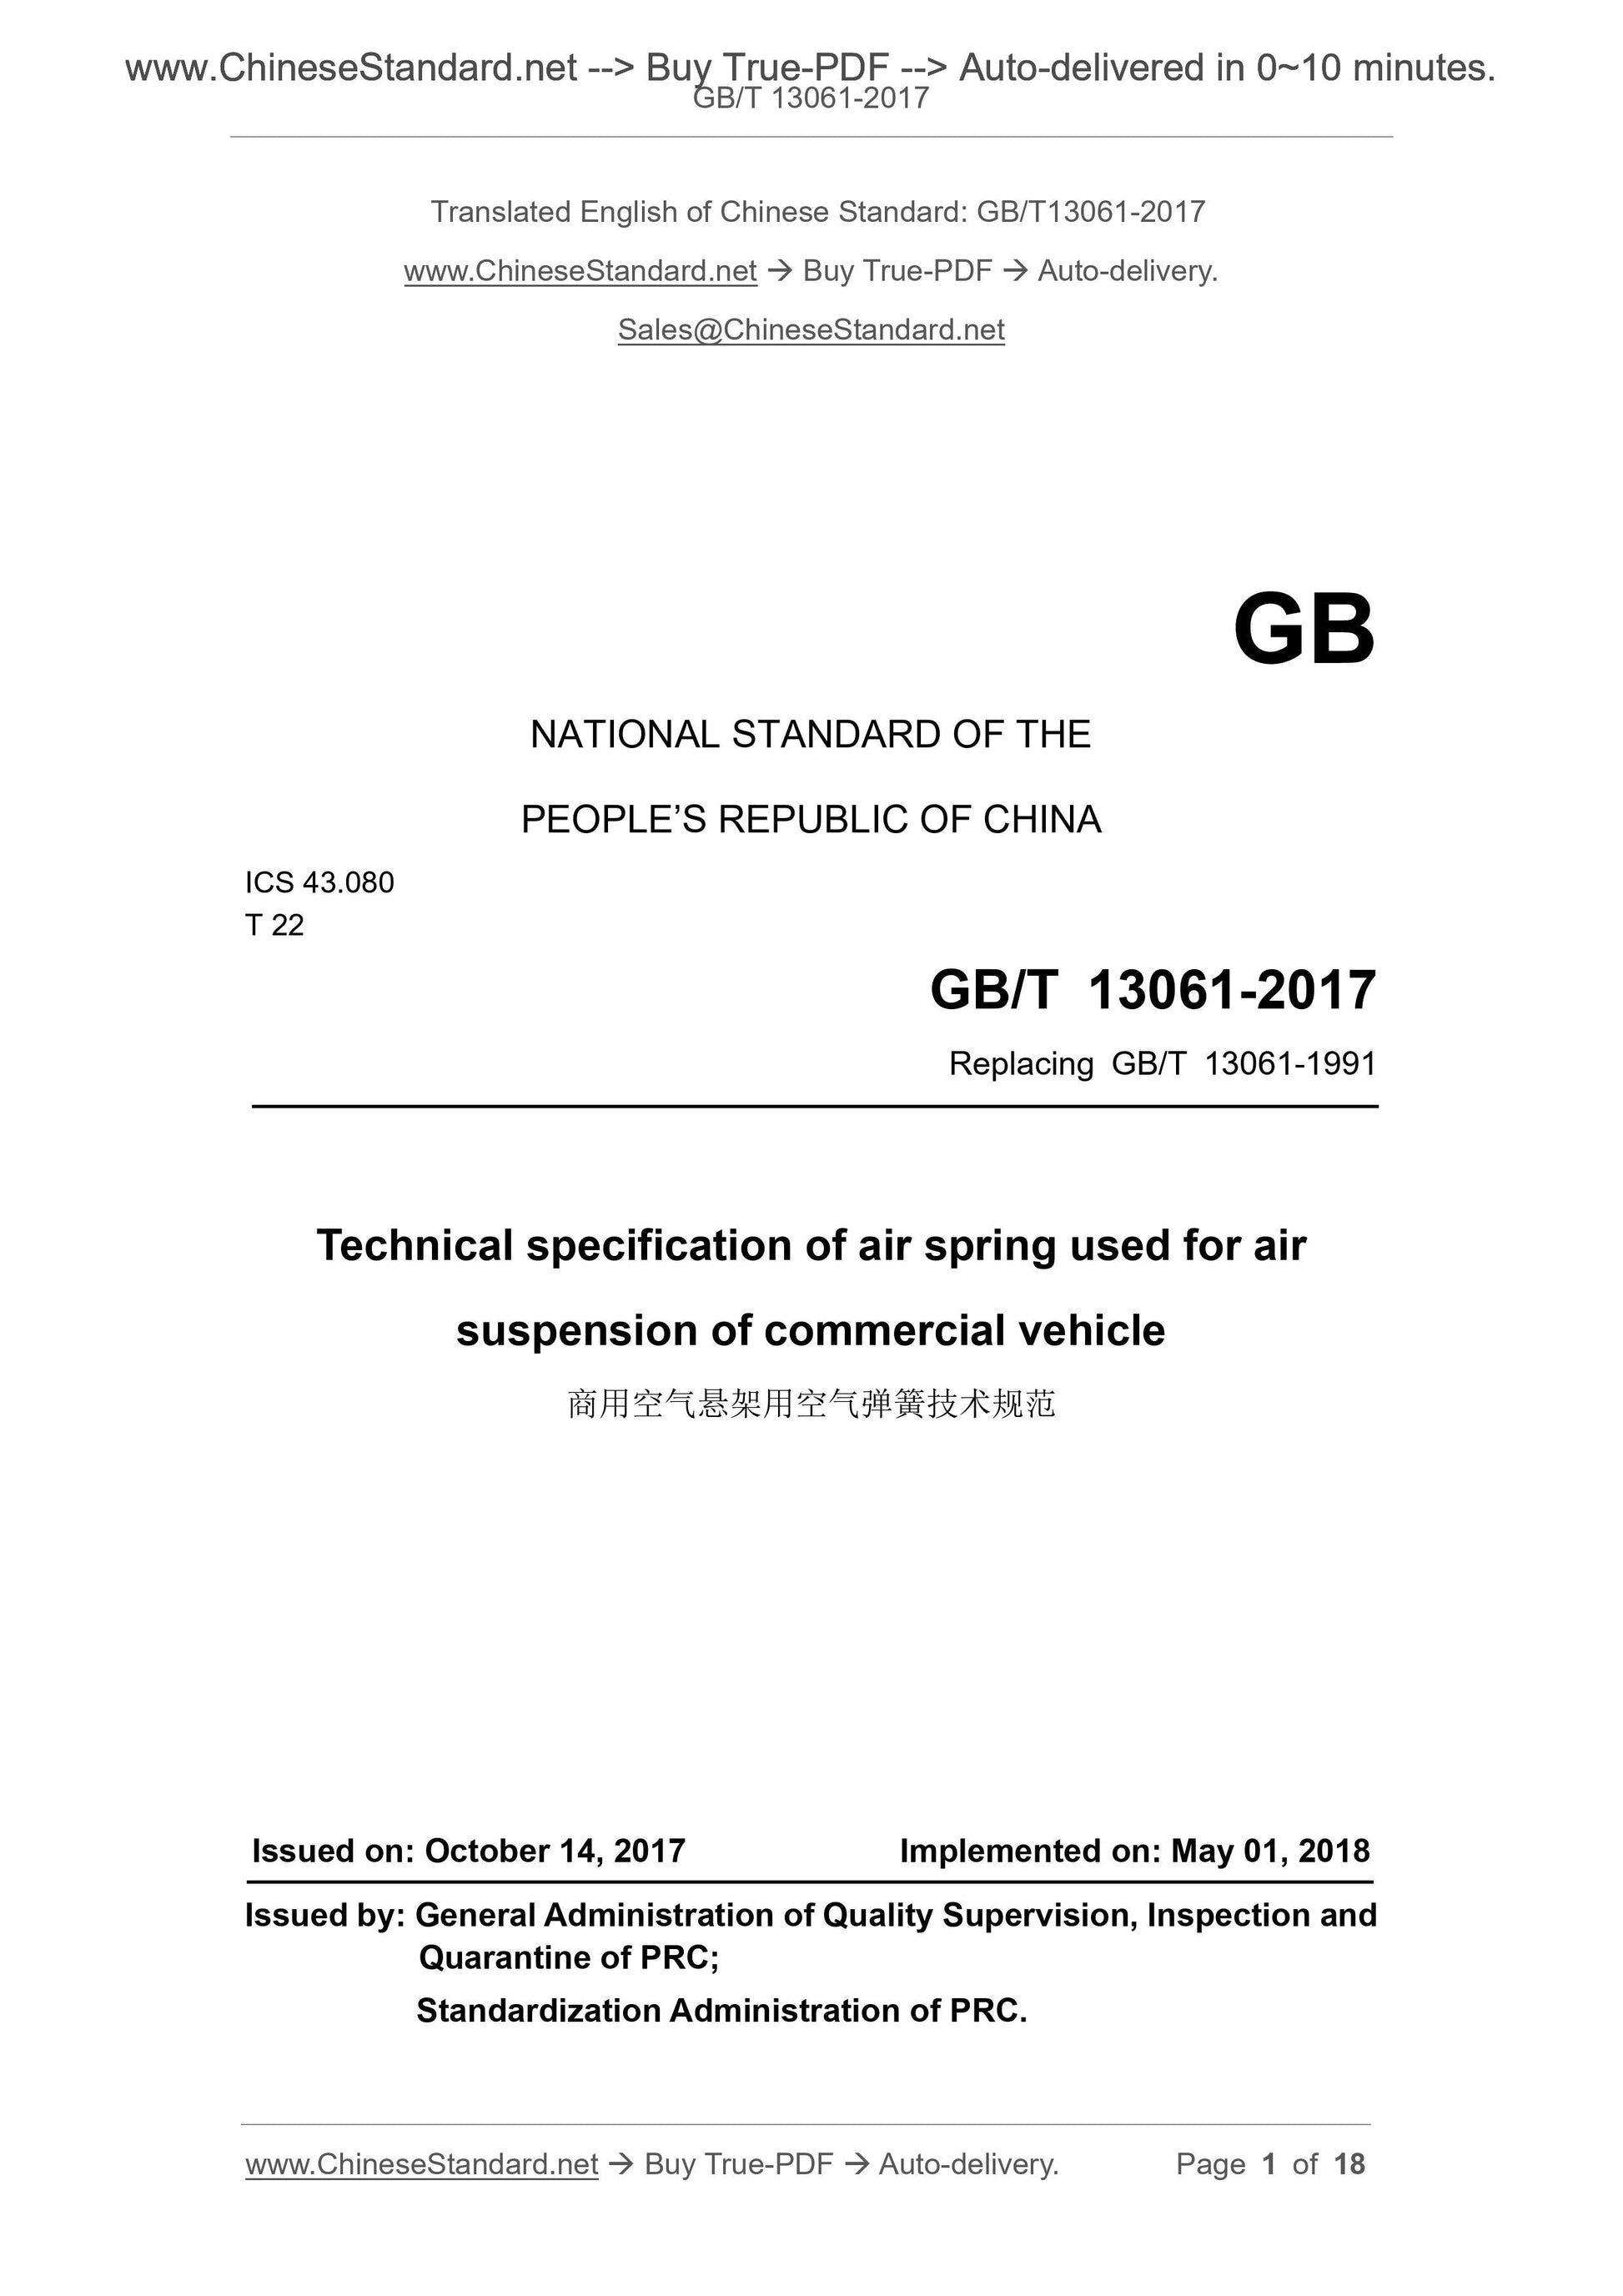 GB/T 13061-2017 Page 1